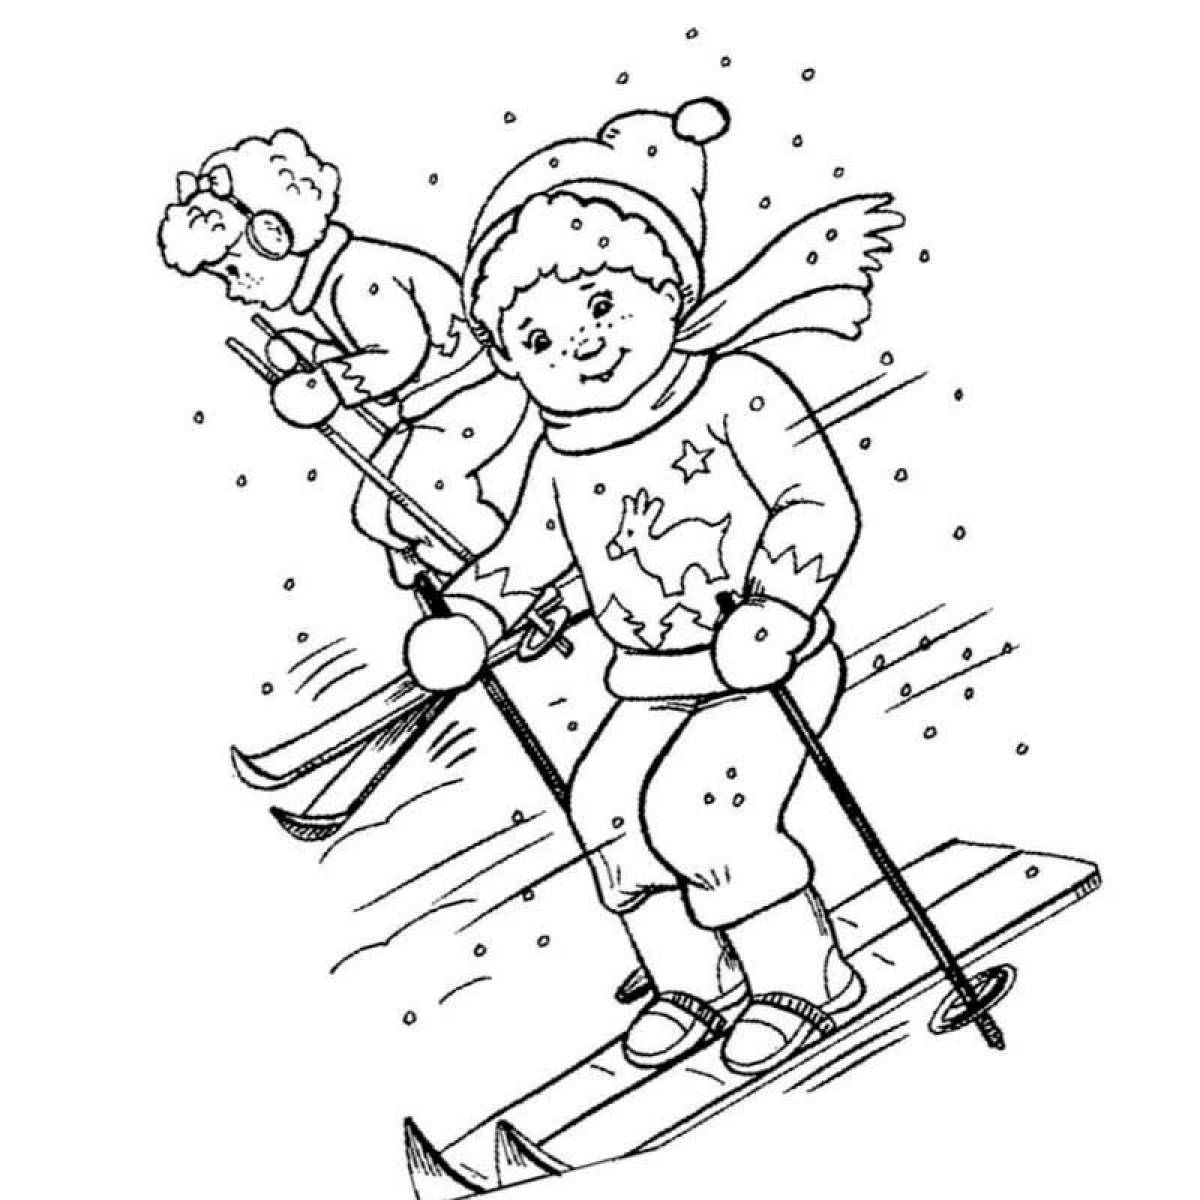 Winter sports for children 5 6 years old #1